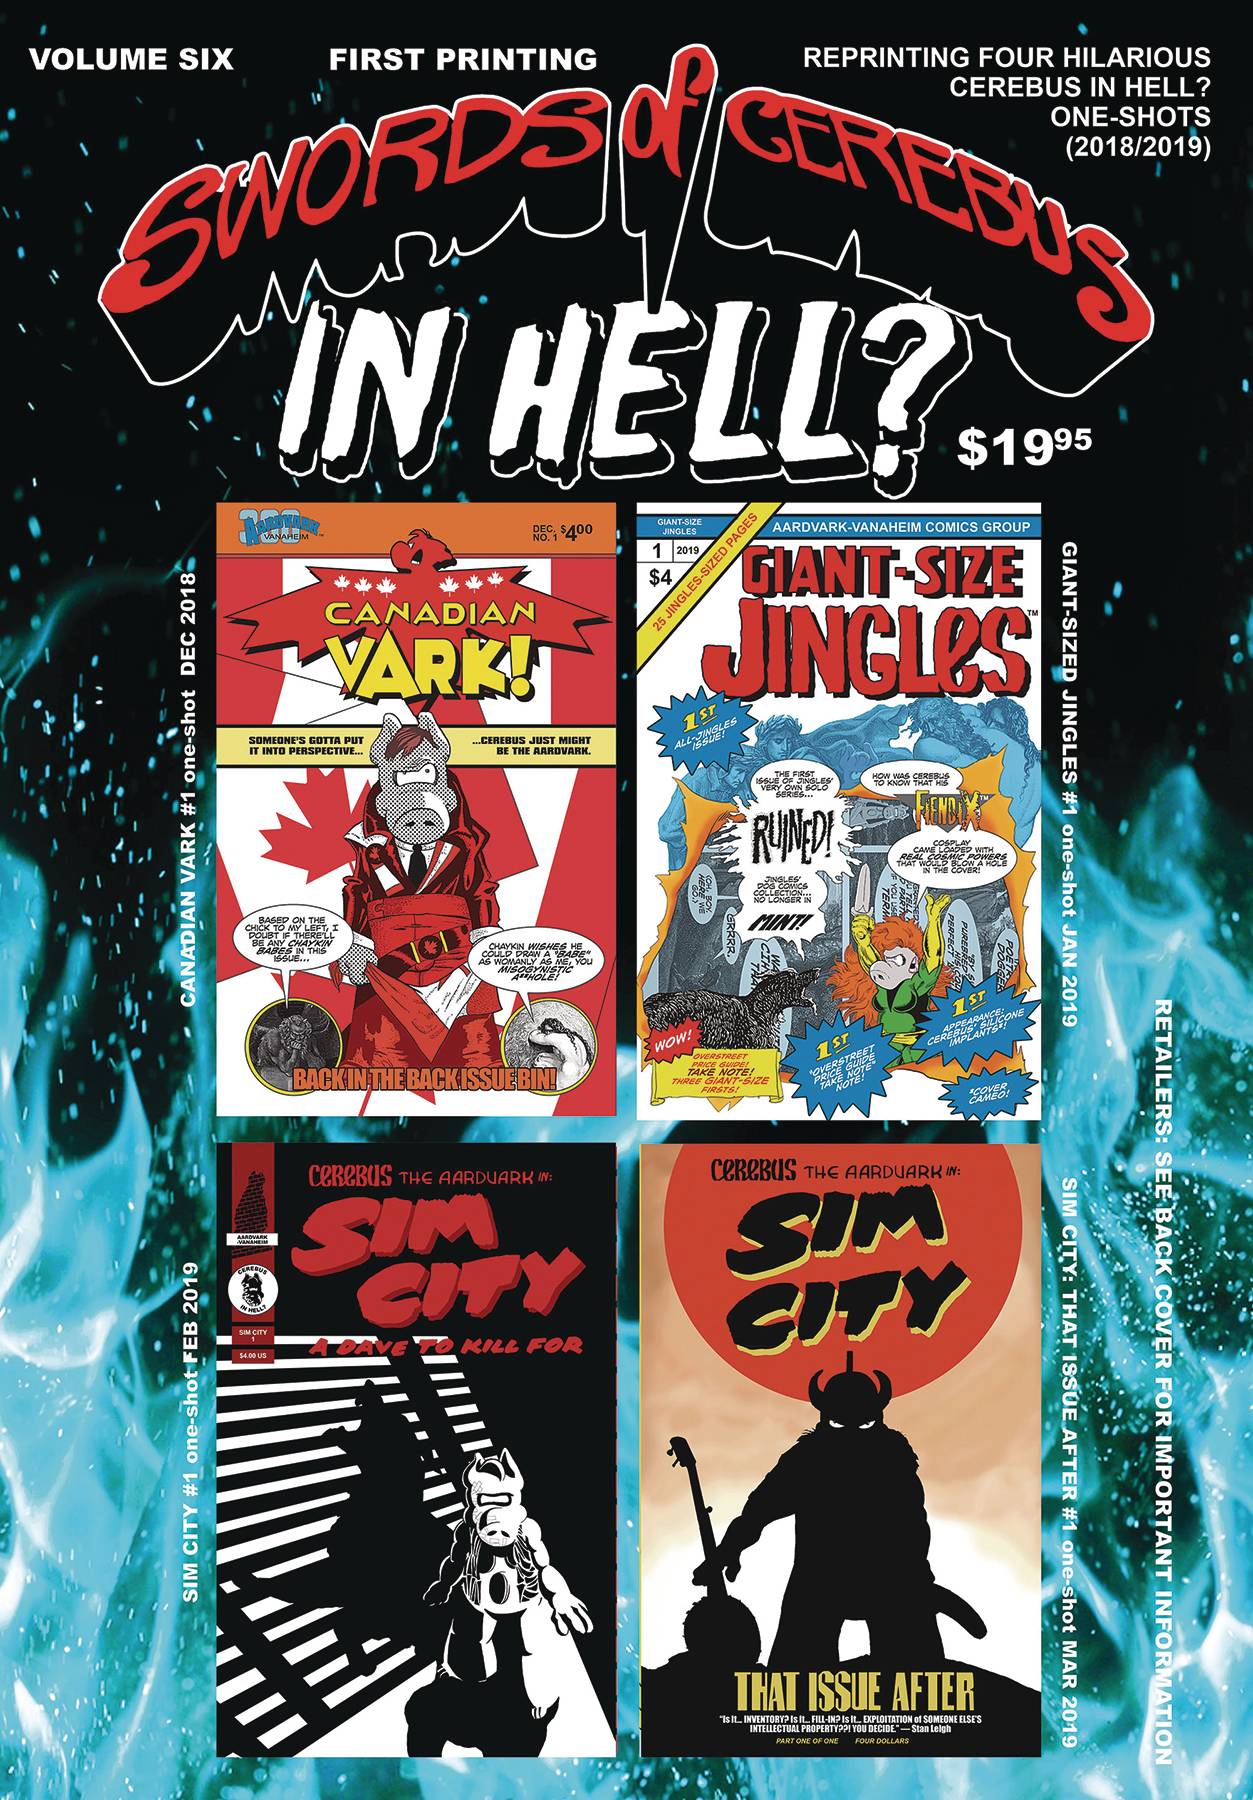 SWORDS OF CEREBUS IN HELL TP 06